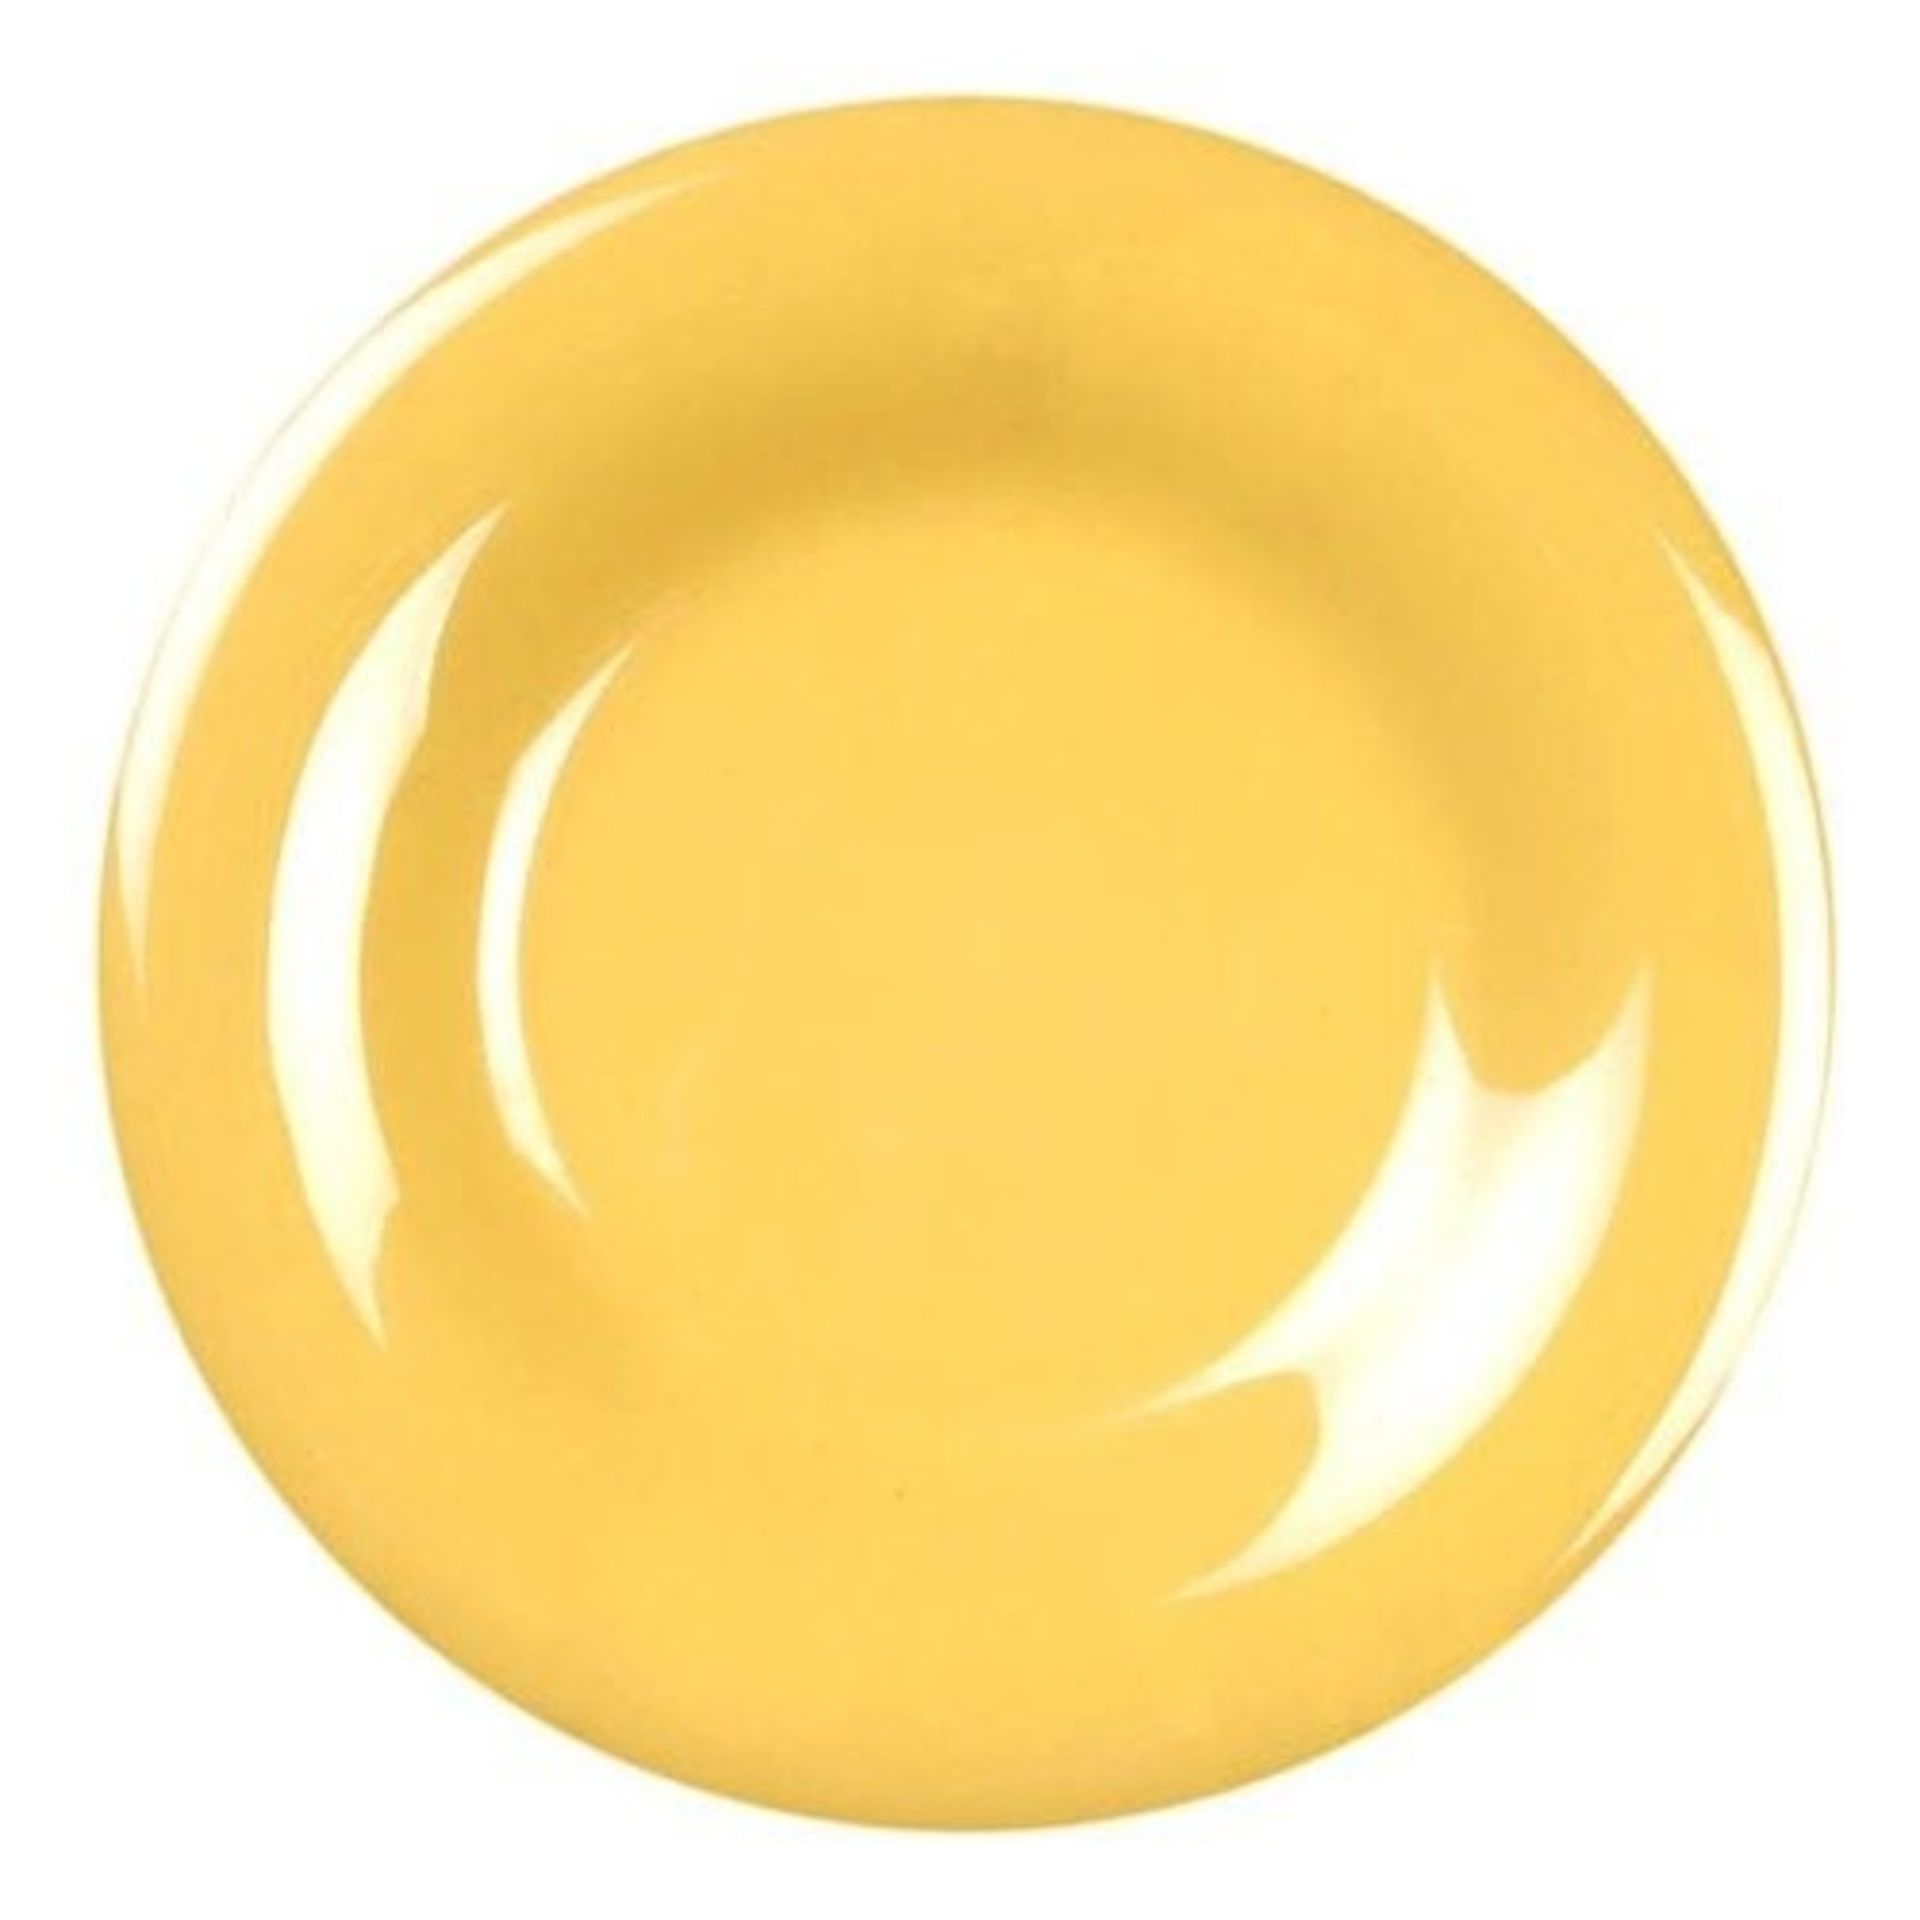 ME : 1 LOT TO CONTAIN 8 MELAMONE PLATES IN YELLOW - APPROX 7" DIAMETER (VIEWING HIGHLY RECOMMENDED)